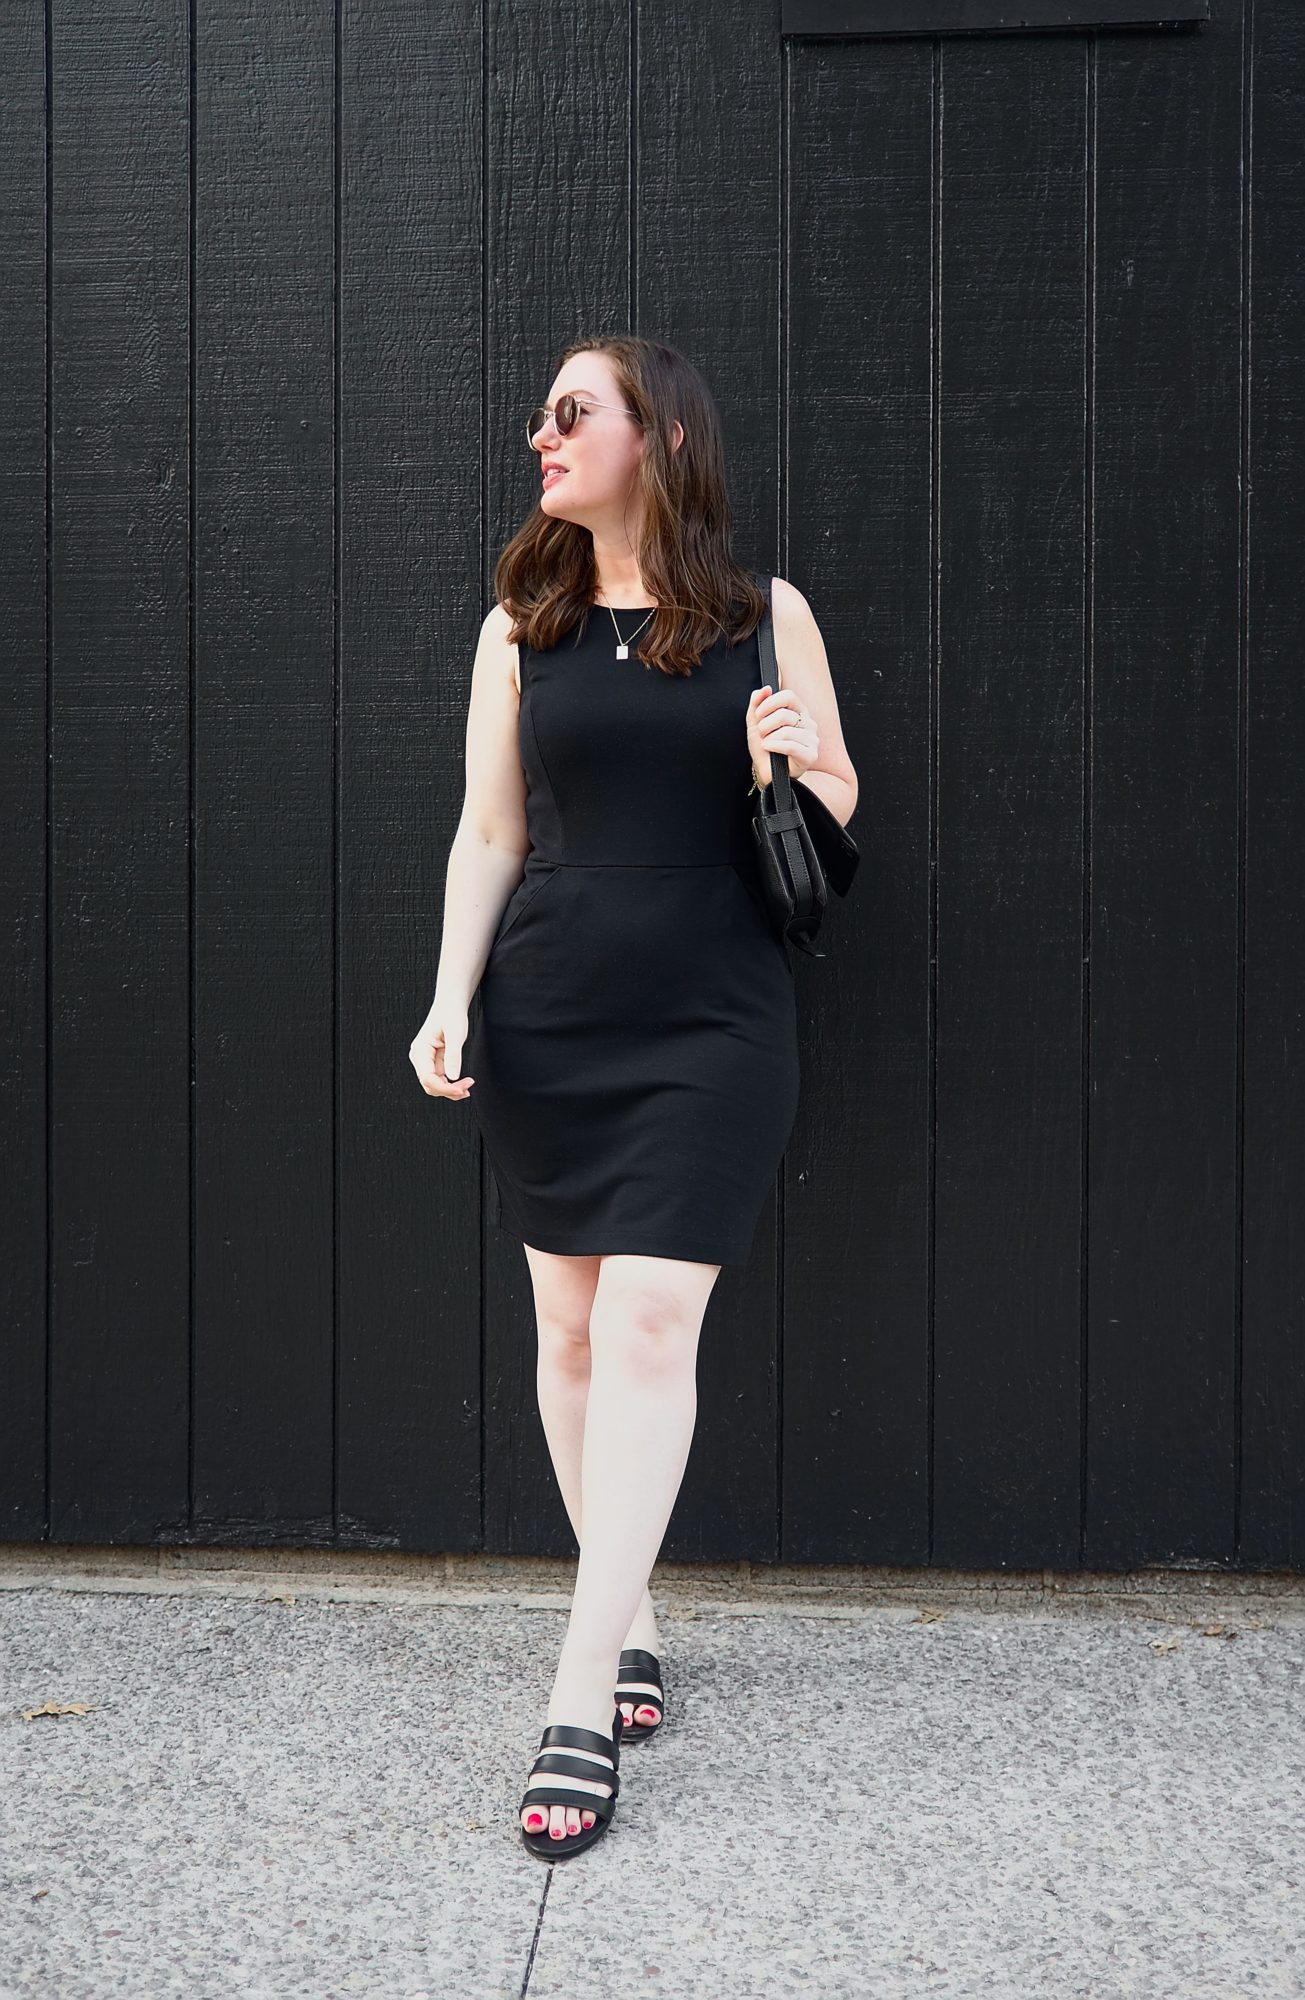 Alyssa wears a black dress in front of a black wall in Rochester, NY